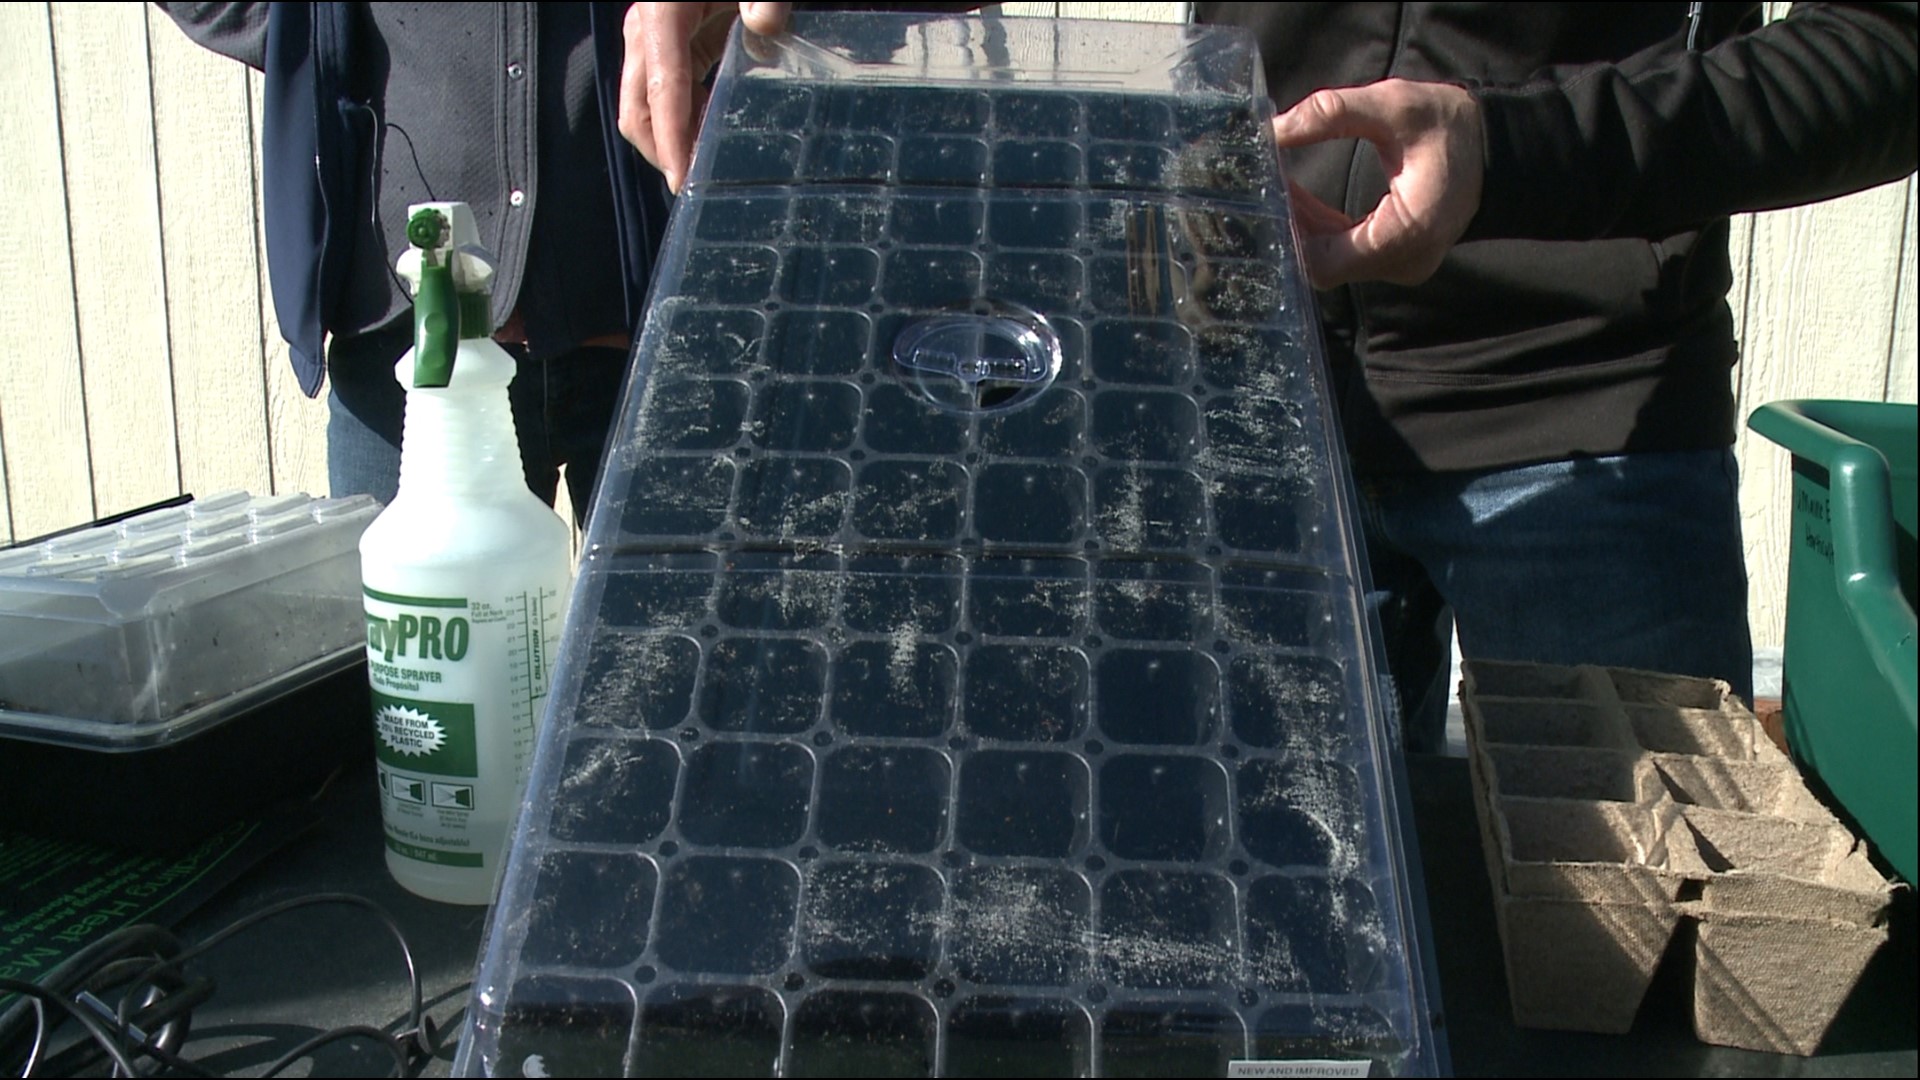 Starting seedlings can be a great way to get a head start on the growing season.